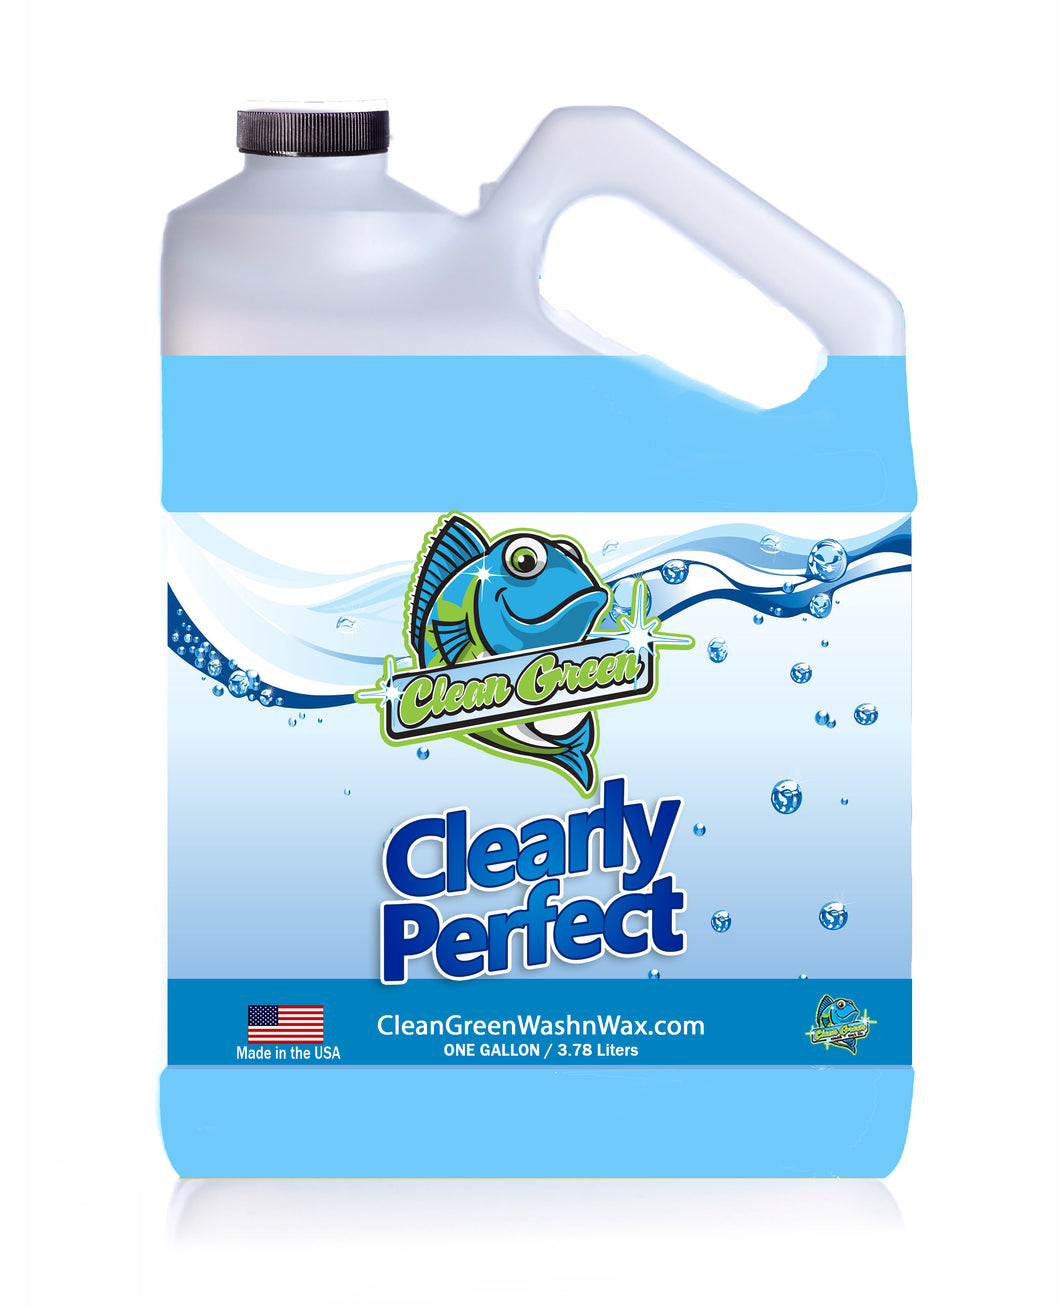 Clean Green Wash & Wax Clearly Perfect Glass 1 Gallon